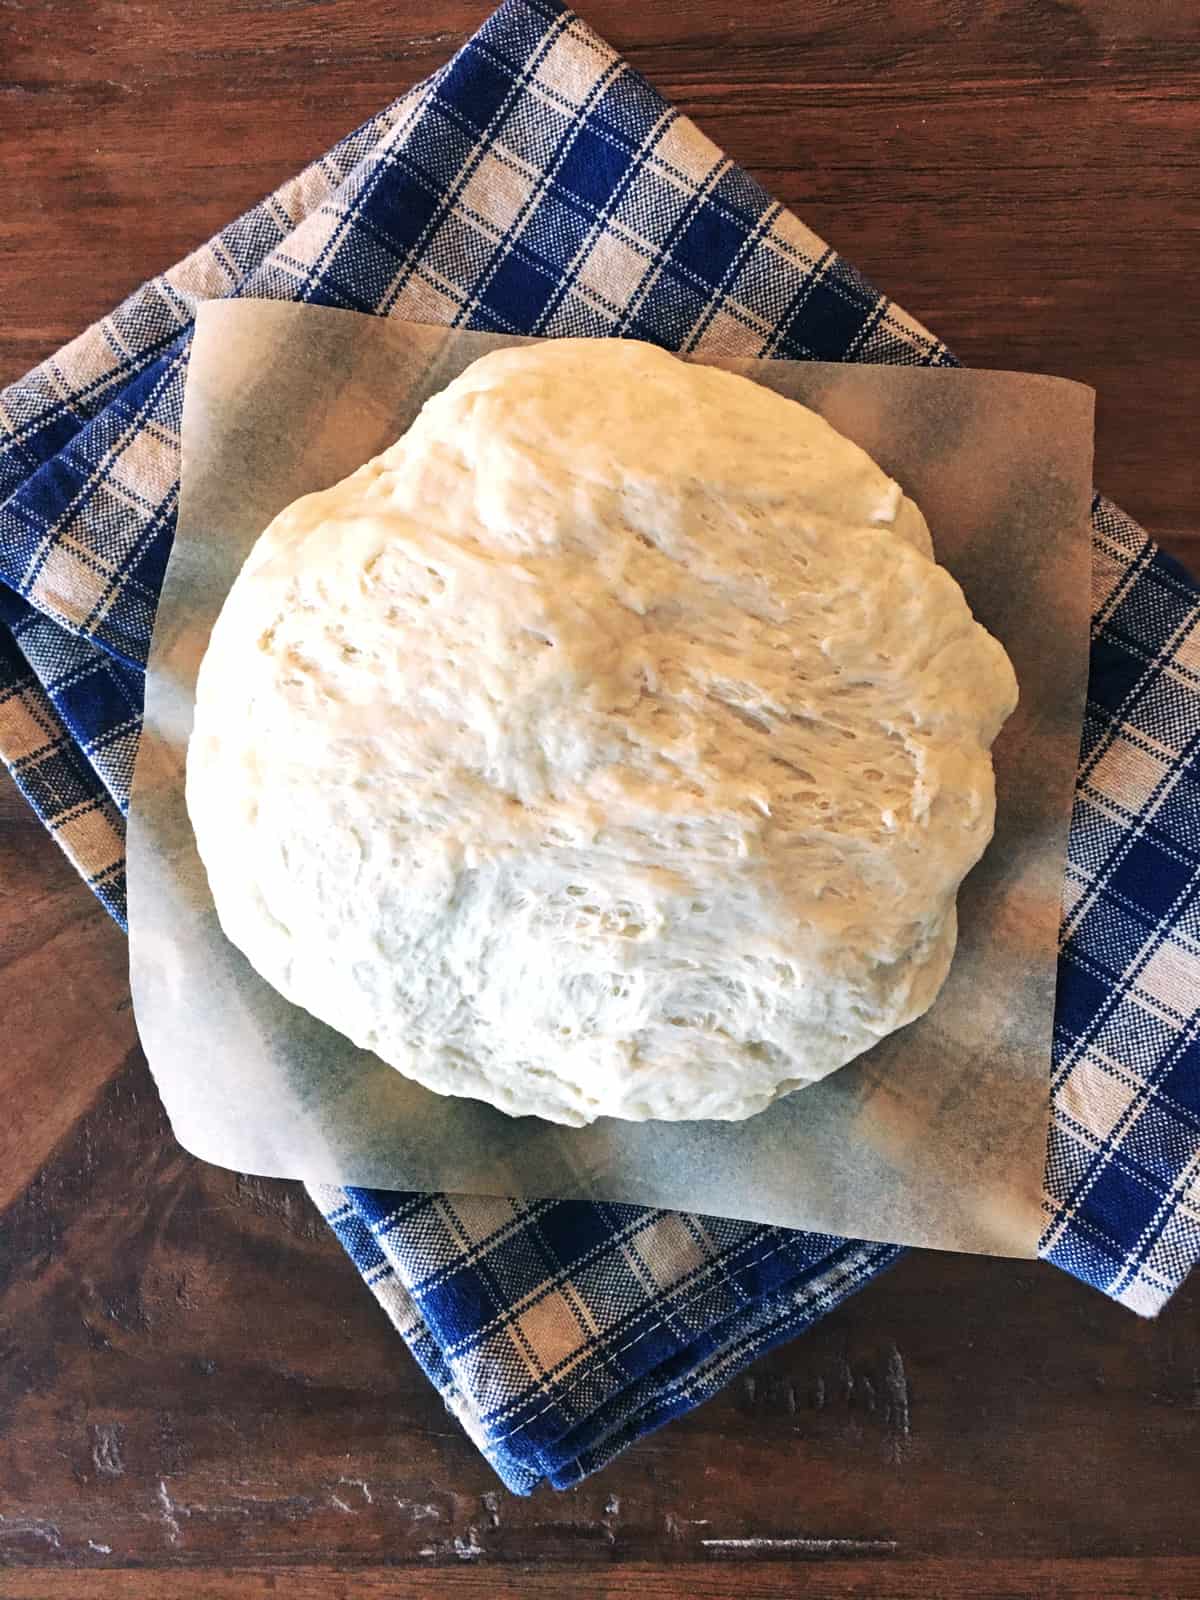 Homemade pizza dough on parchment paper with a blue and tan plaid napkin